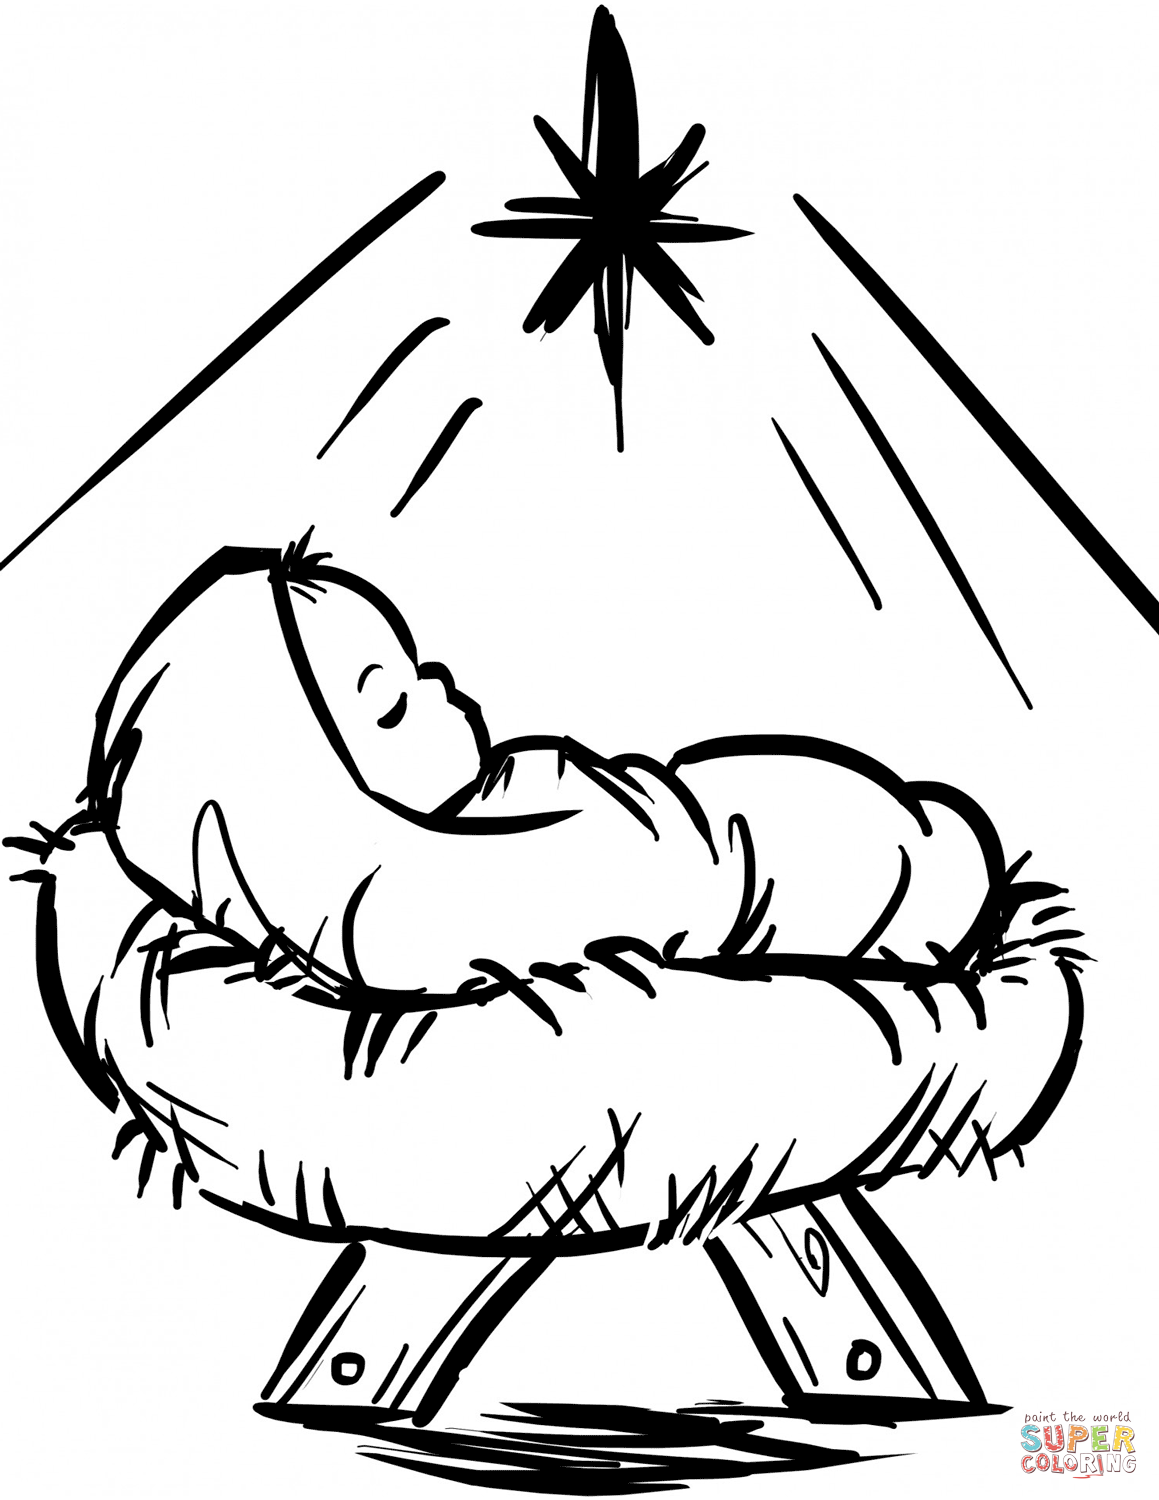 Nativity Coloring Pages | Free download on ClipArtMag